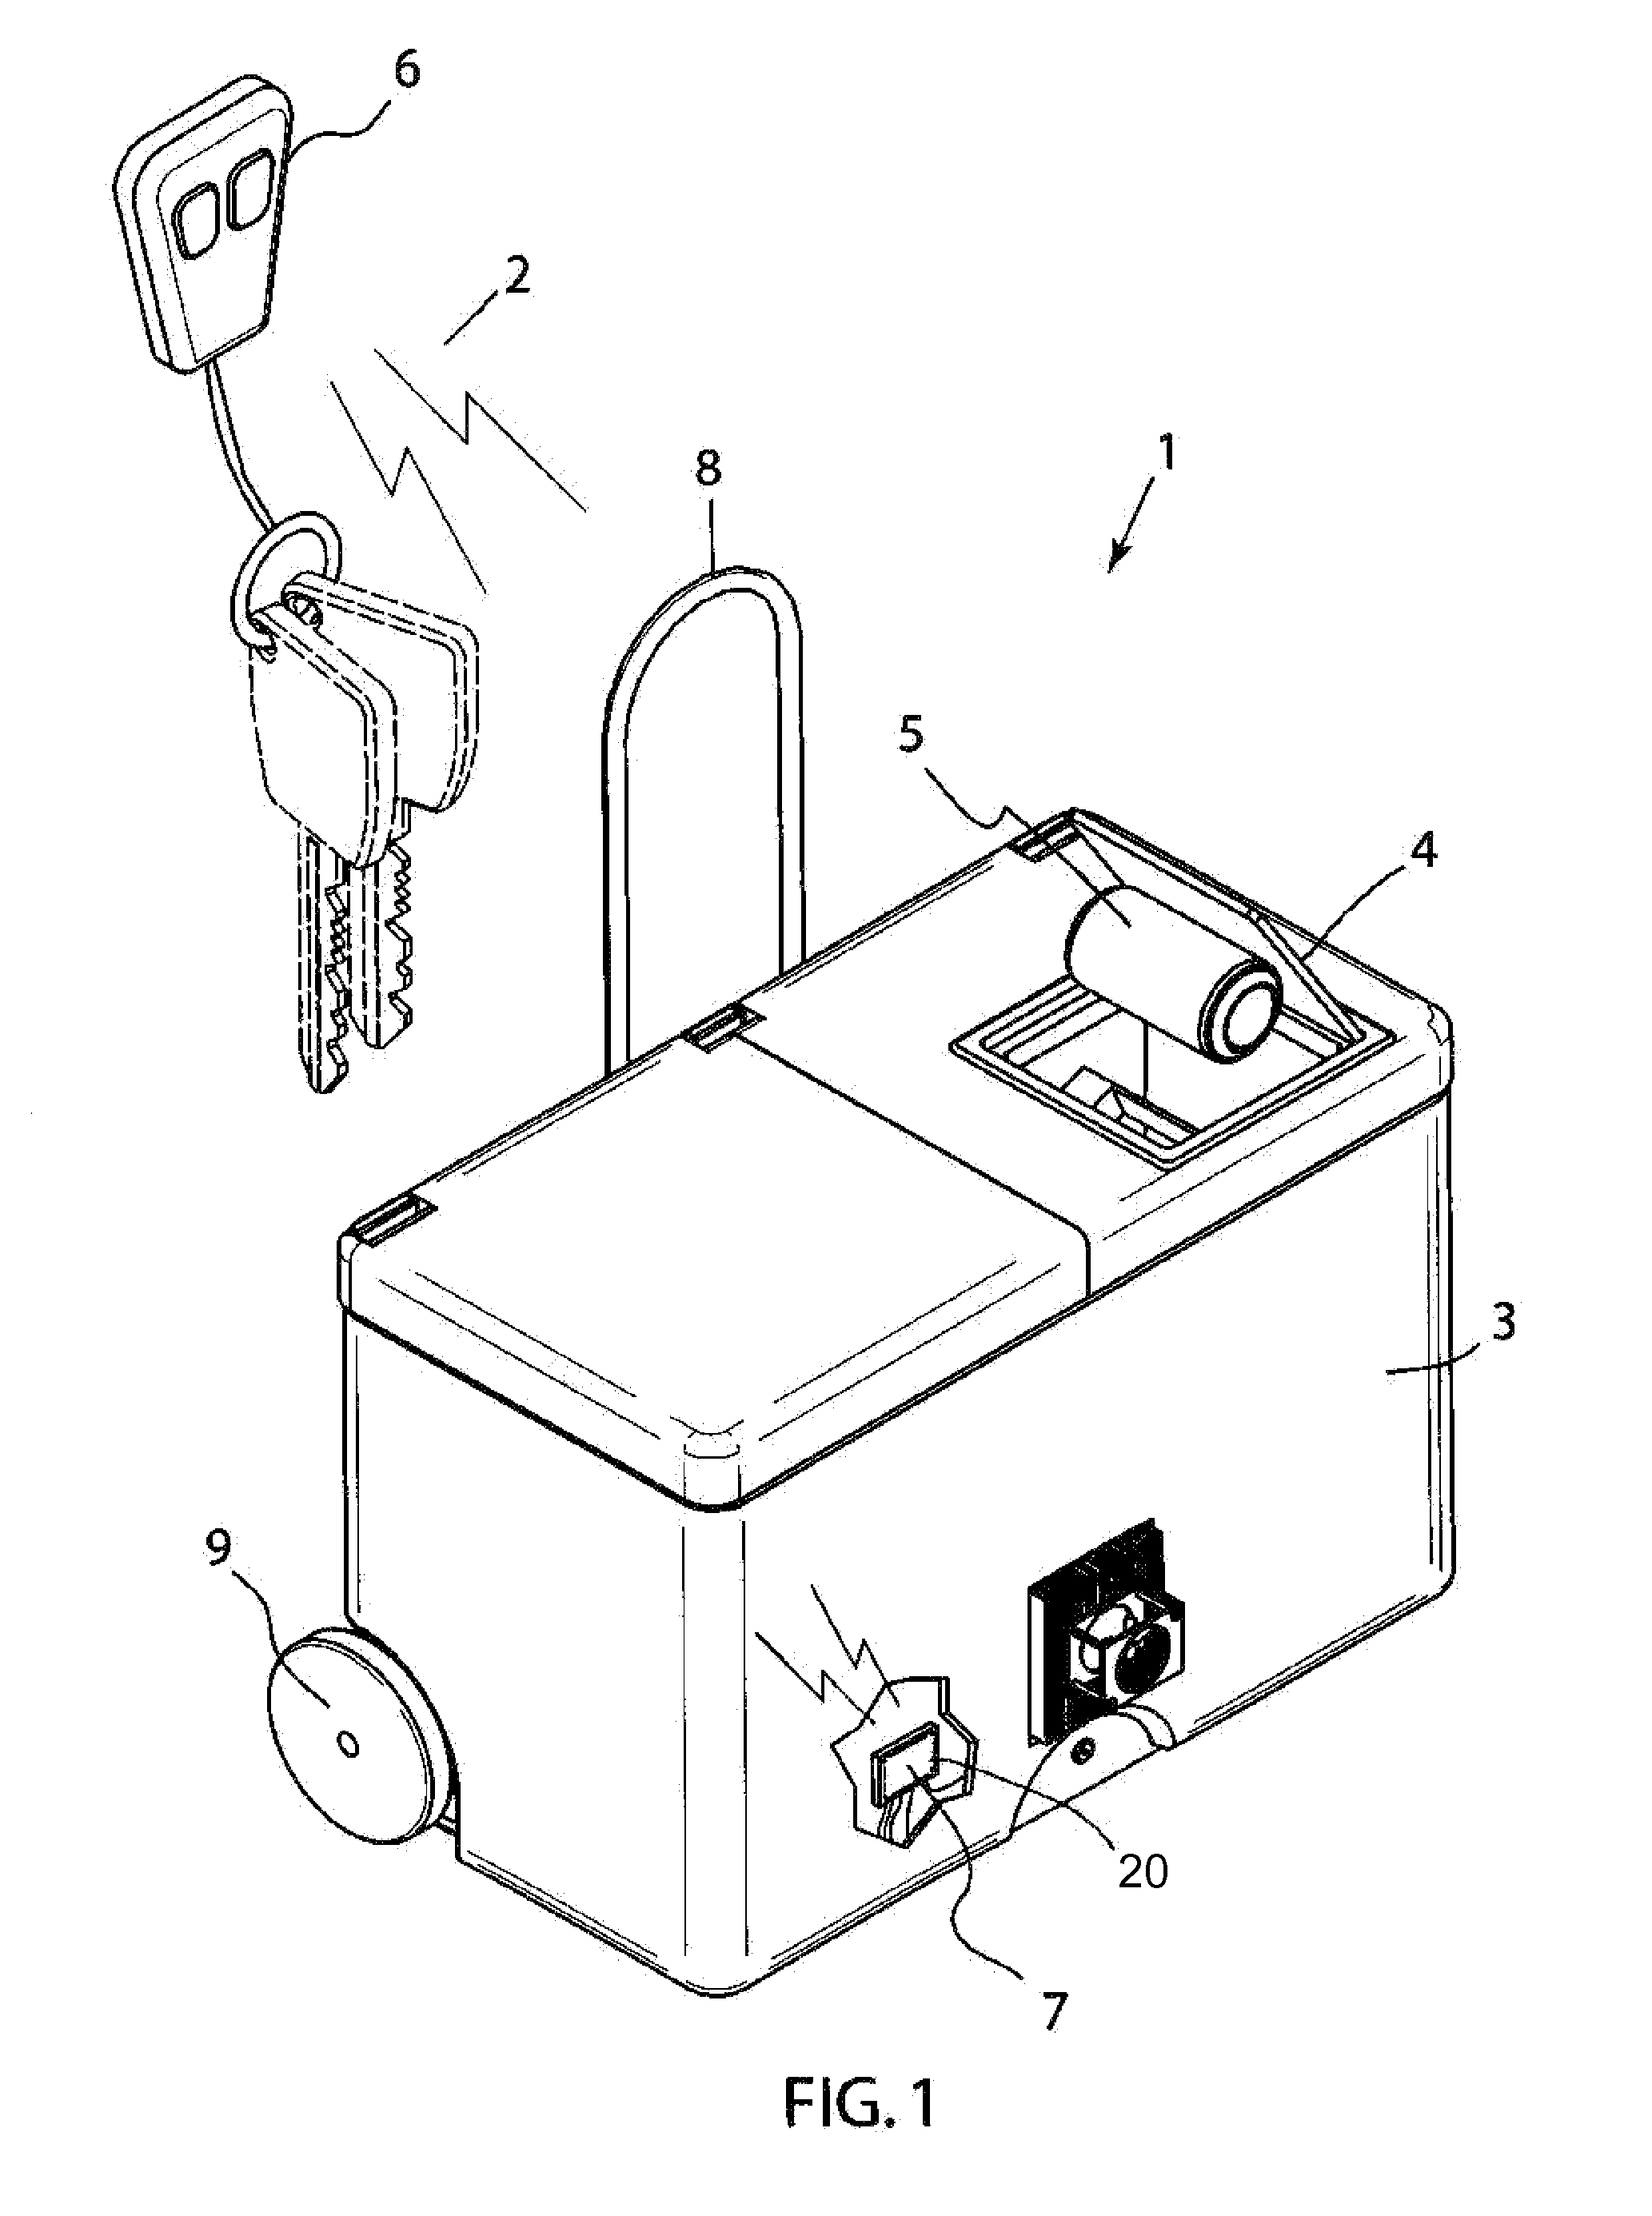 Beverage tossing cooler and method to operate